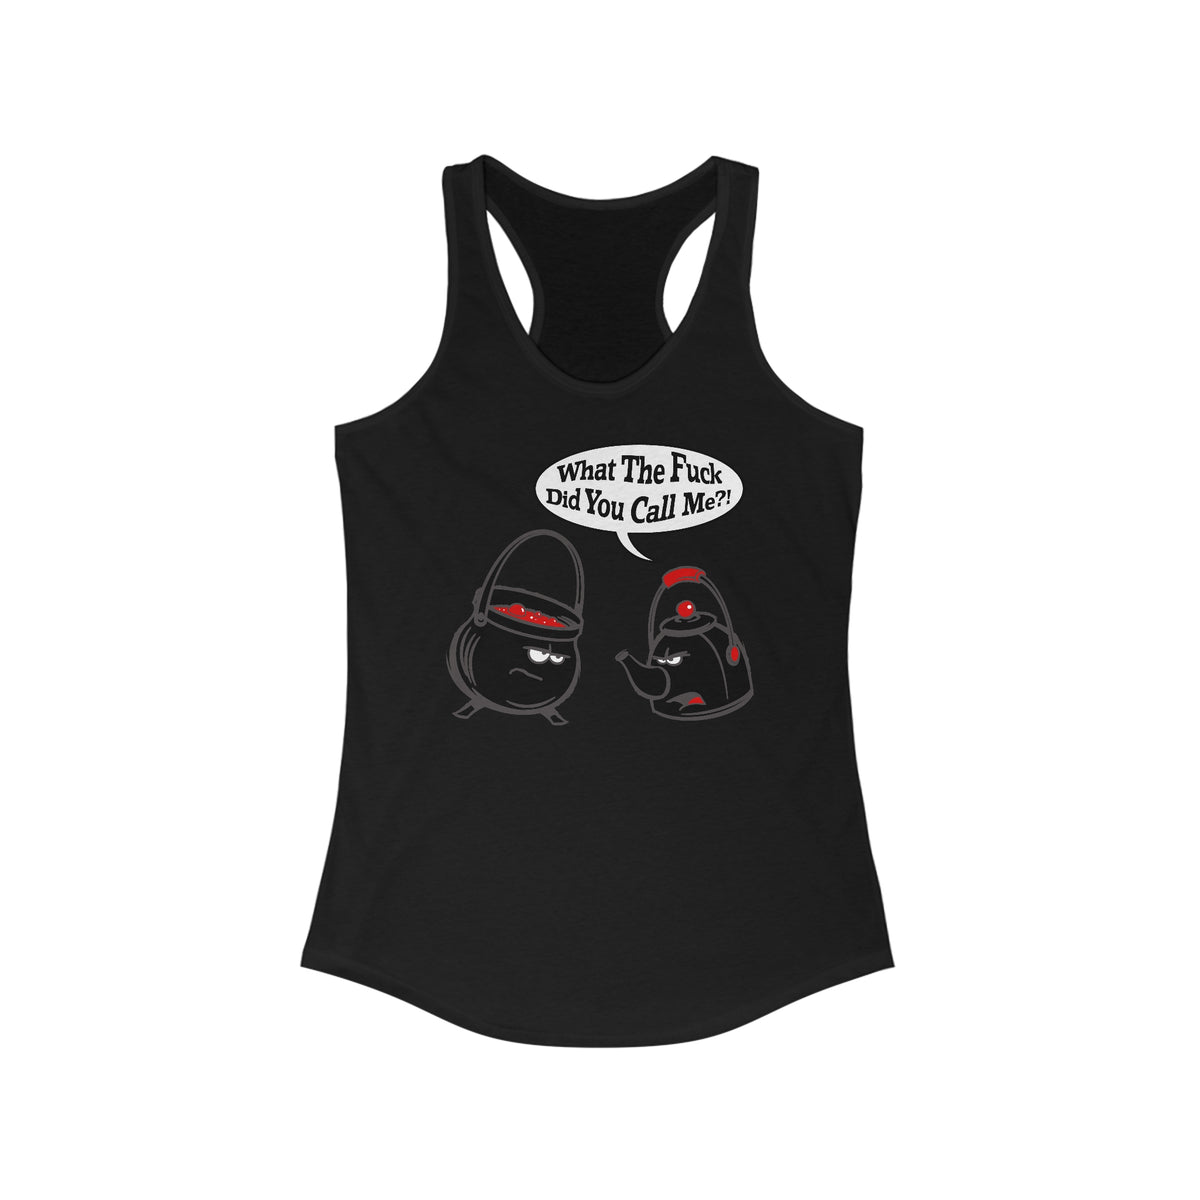 What The Fuck Did You Call Me? (Pot And Kettle) - Women’s Racerback Tank